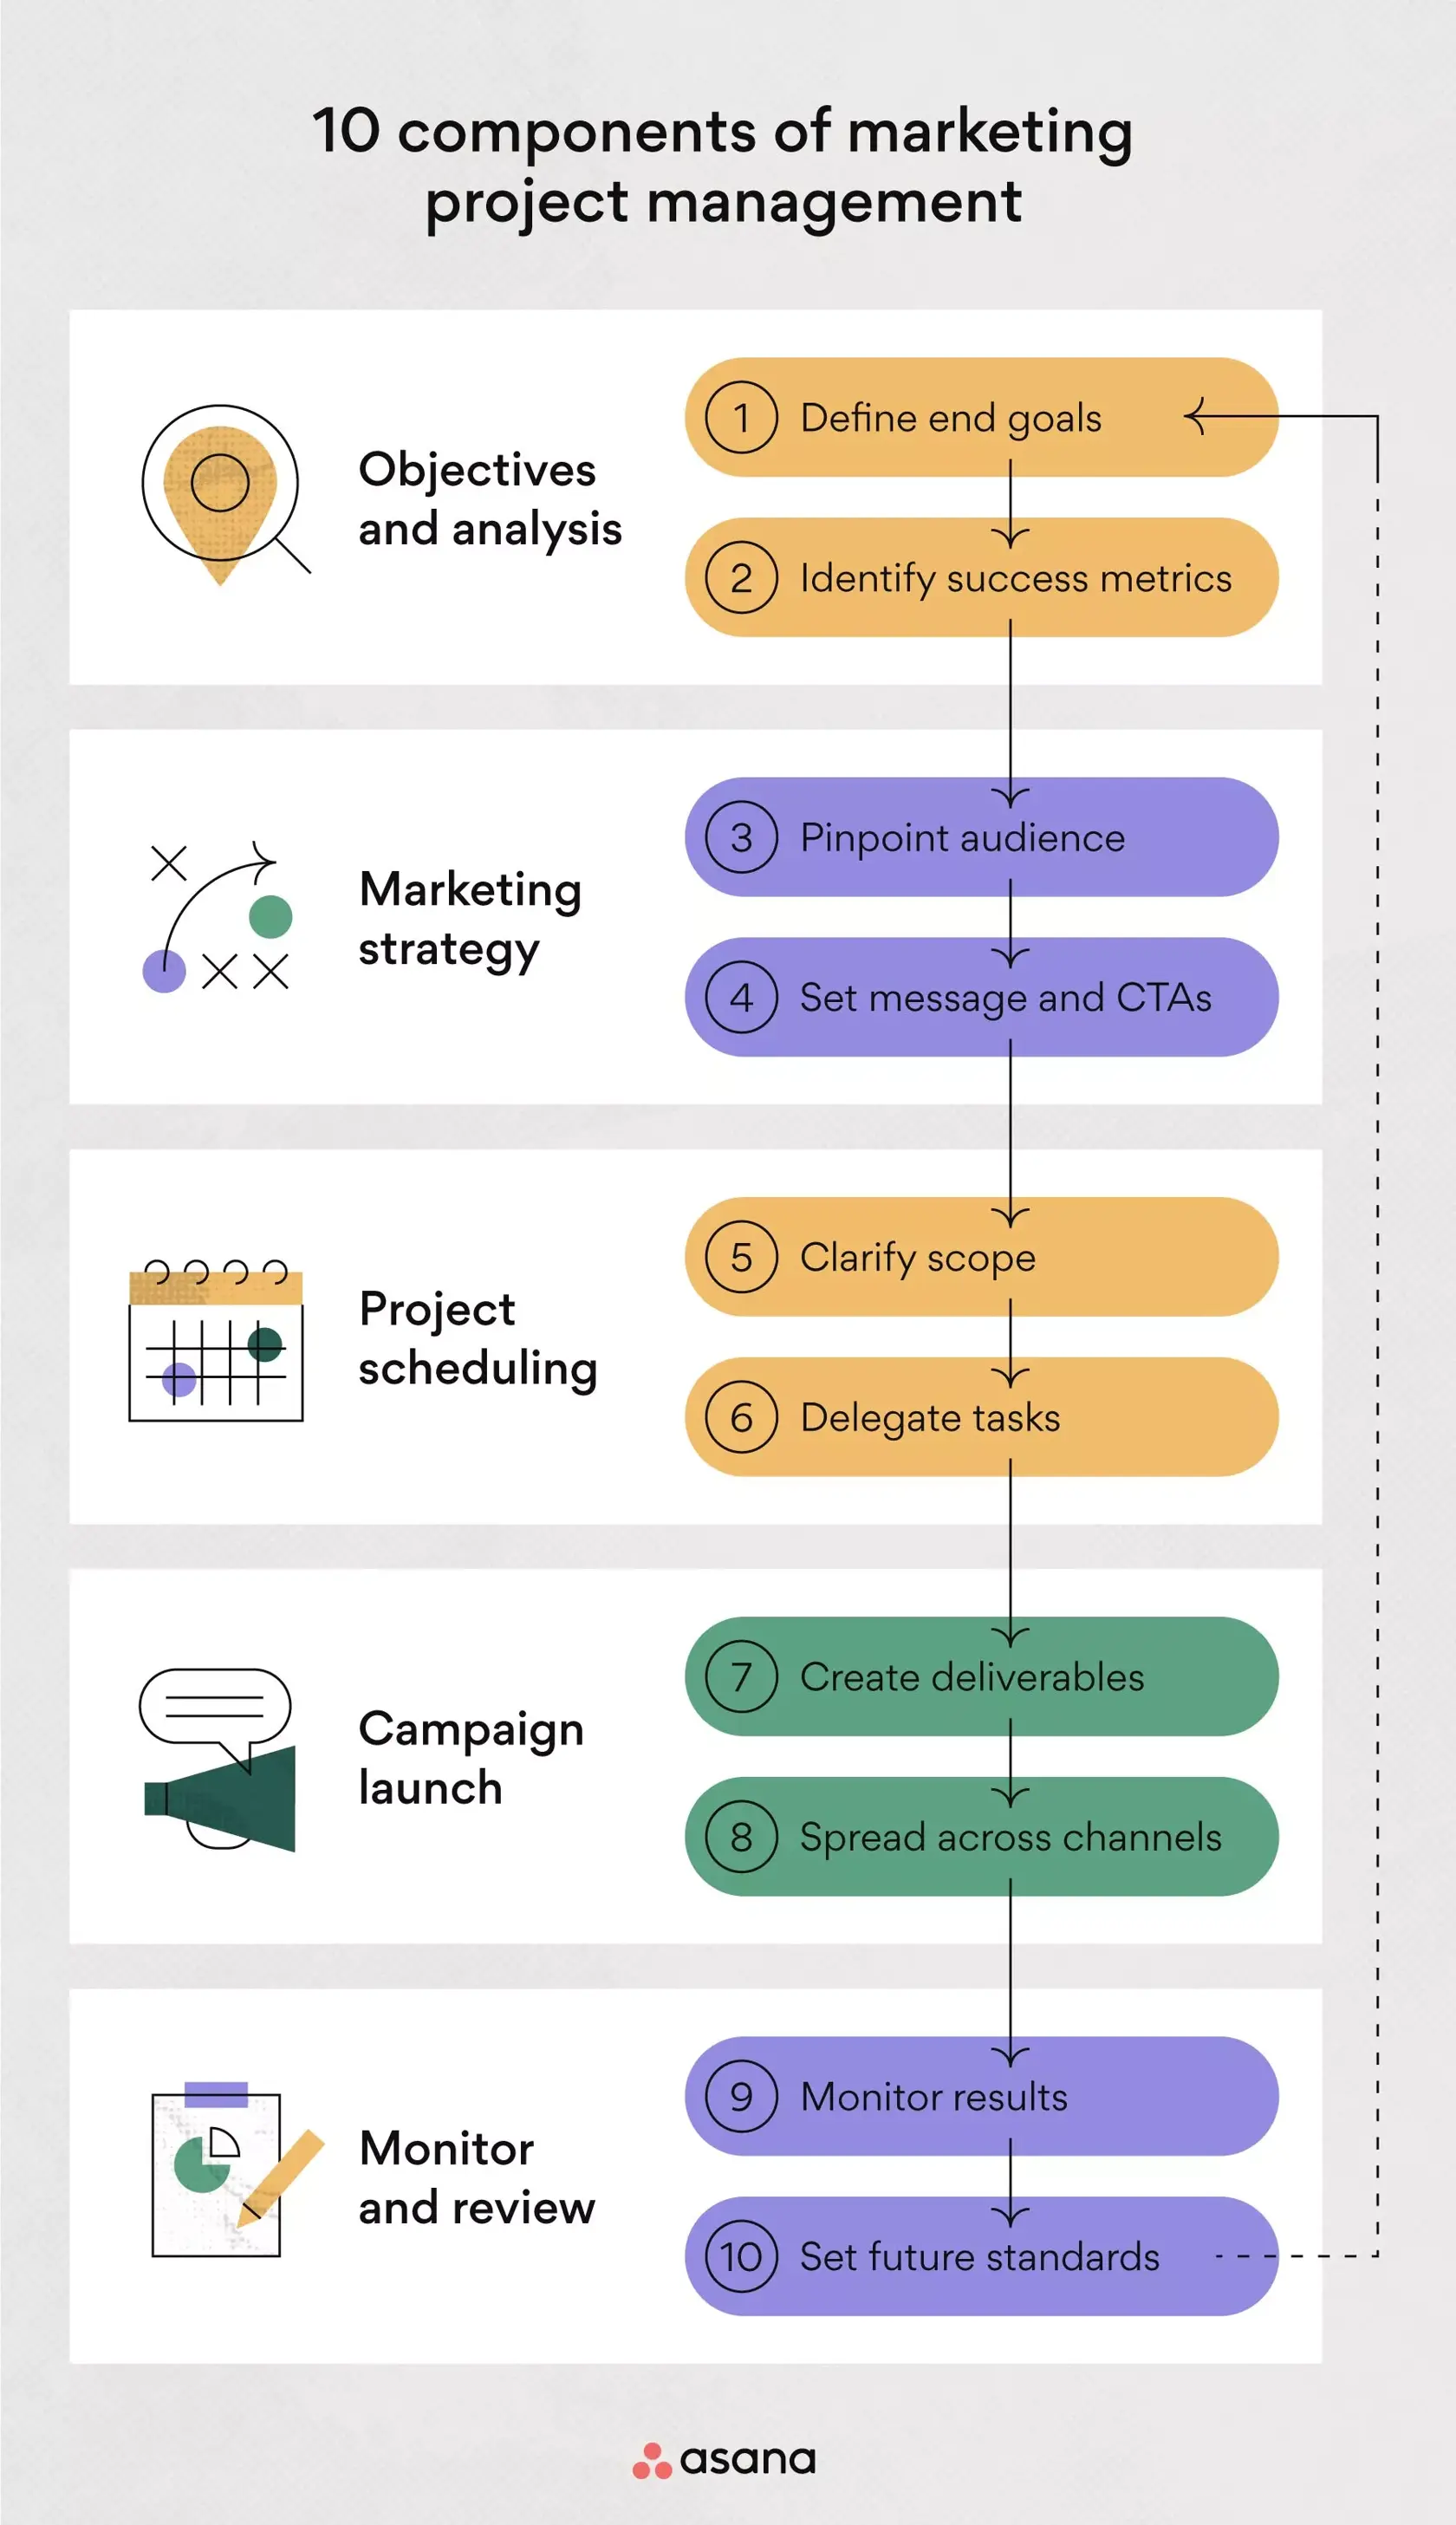 The marketing project management process